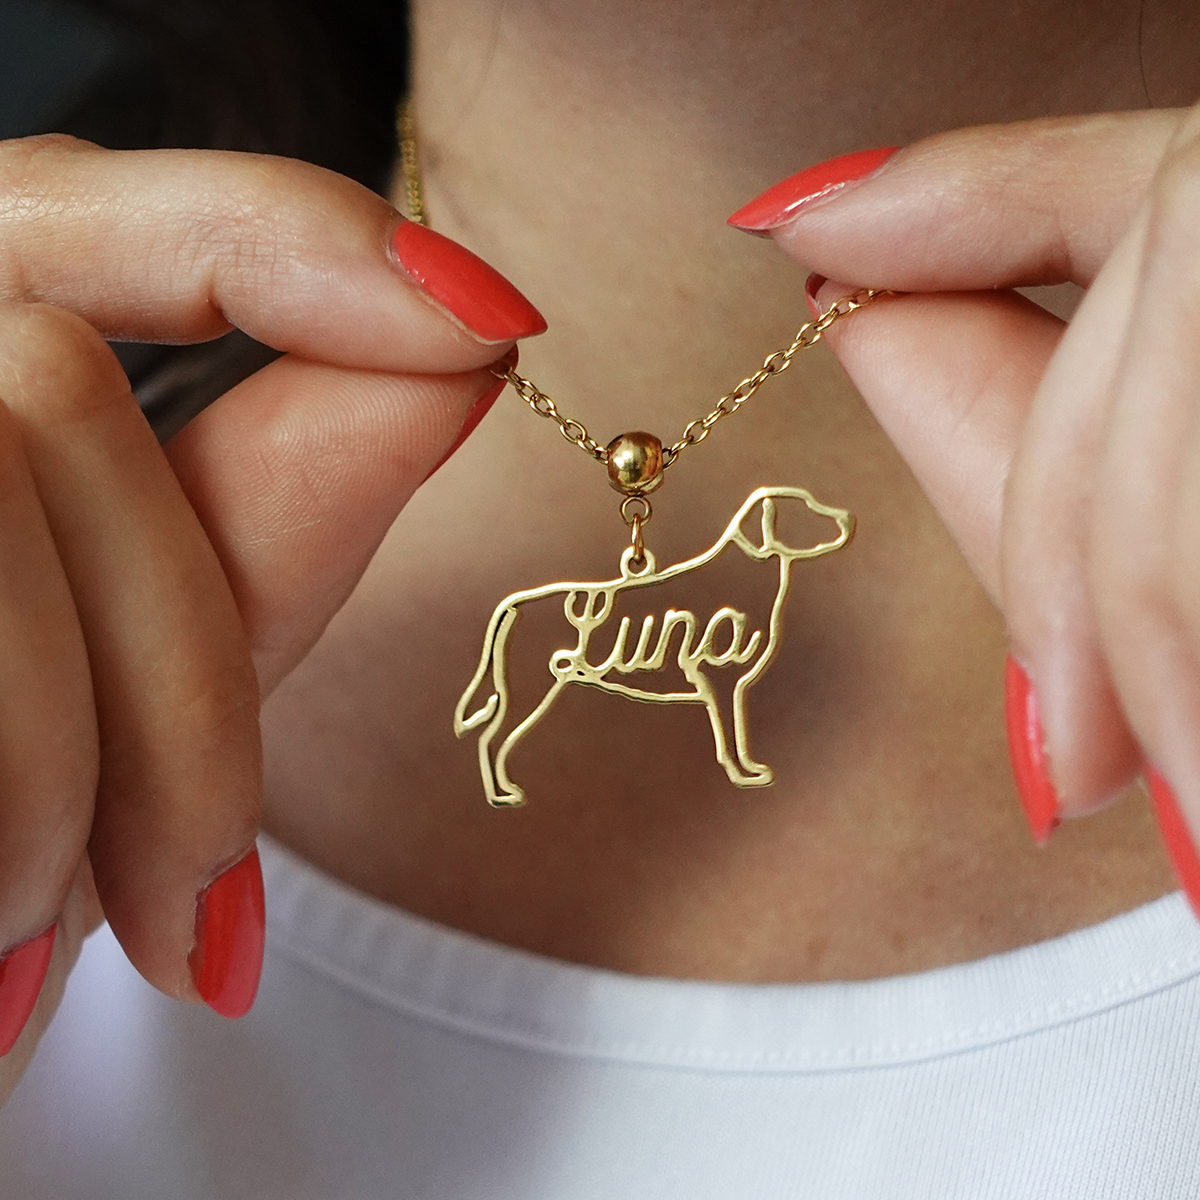 Personalized Dog Breed Necklace with Cursive Name